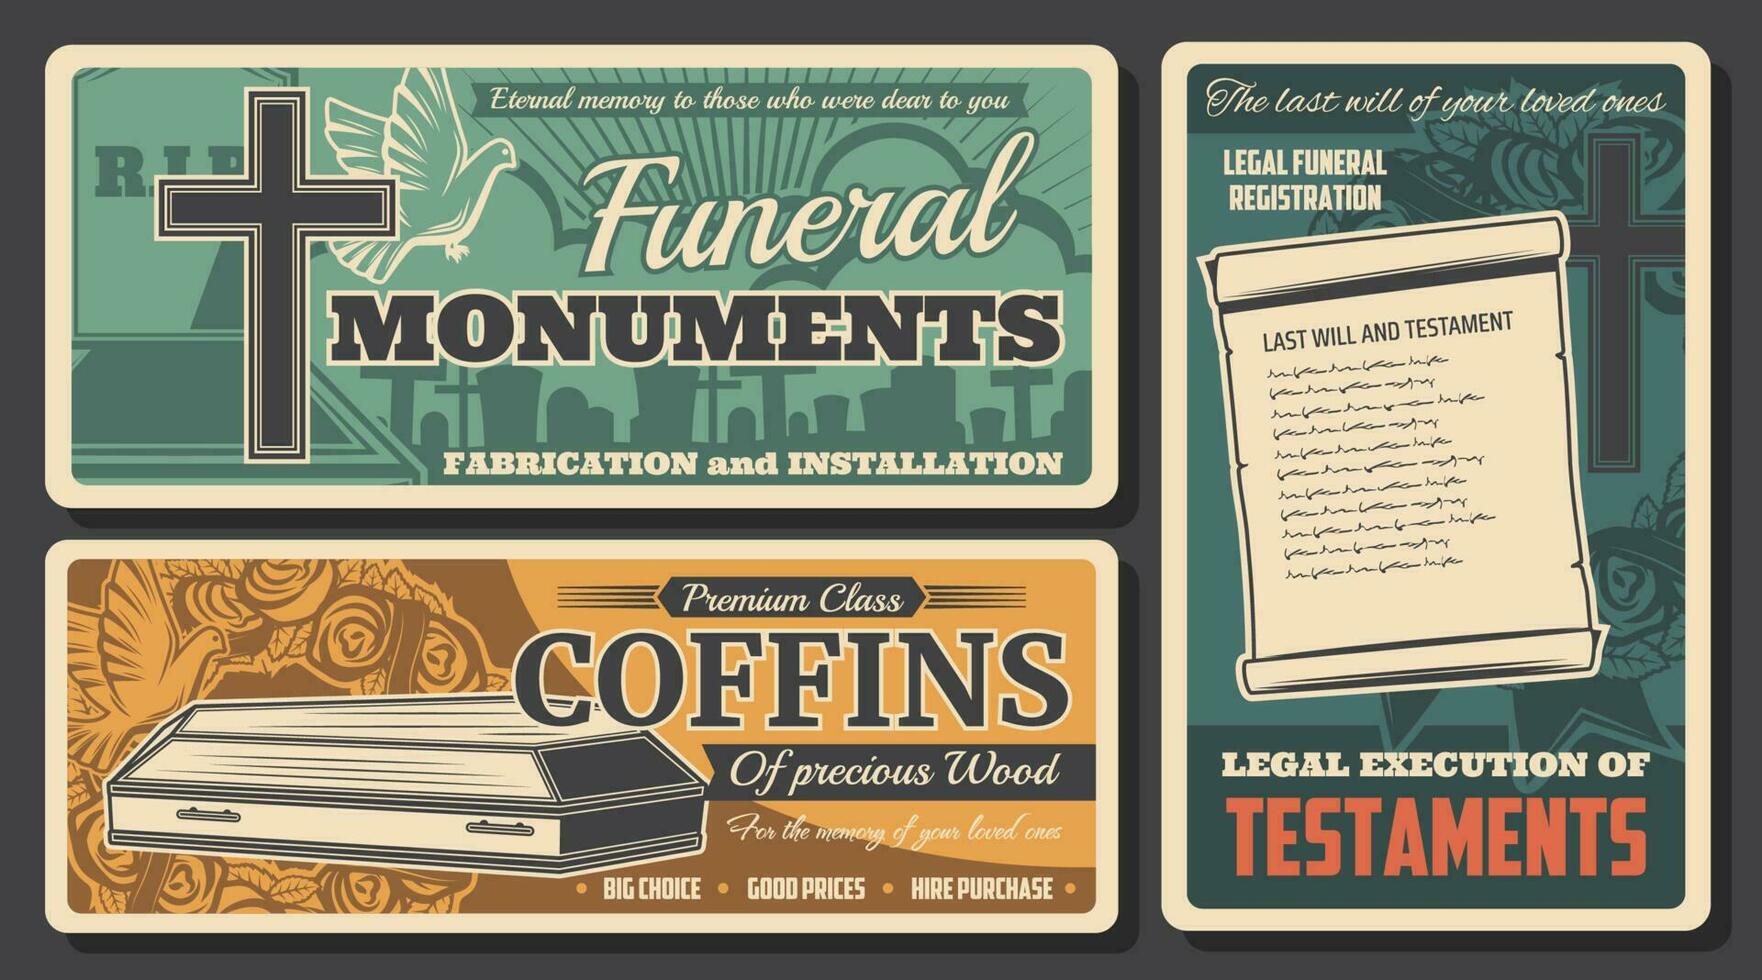 Funeral service, burial coffins, RIP monuments vector